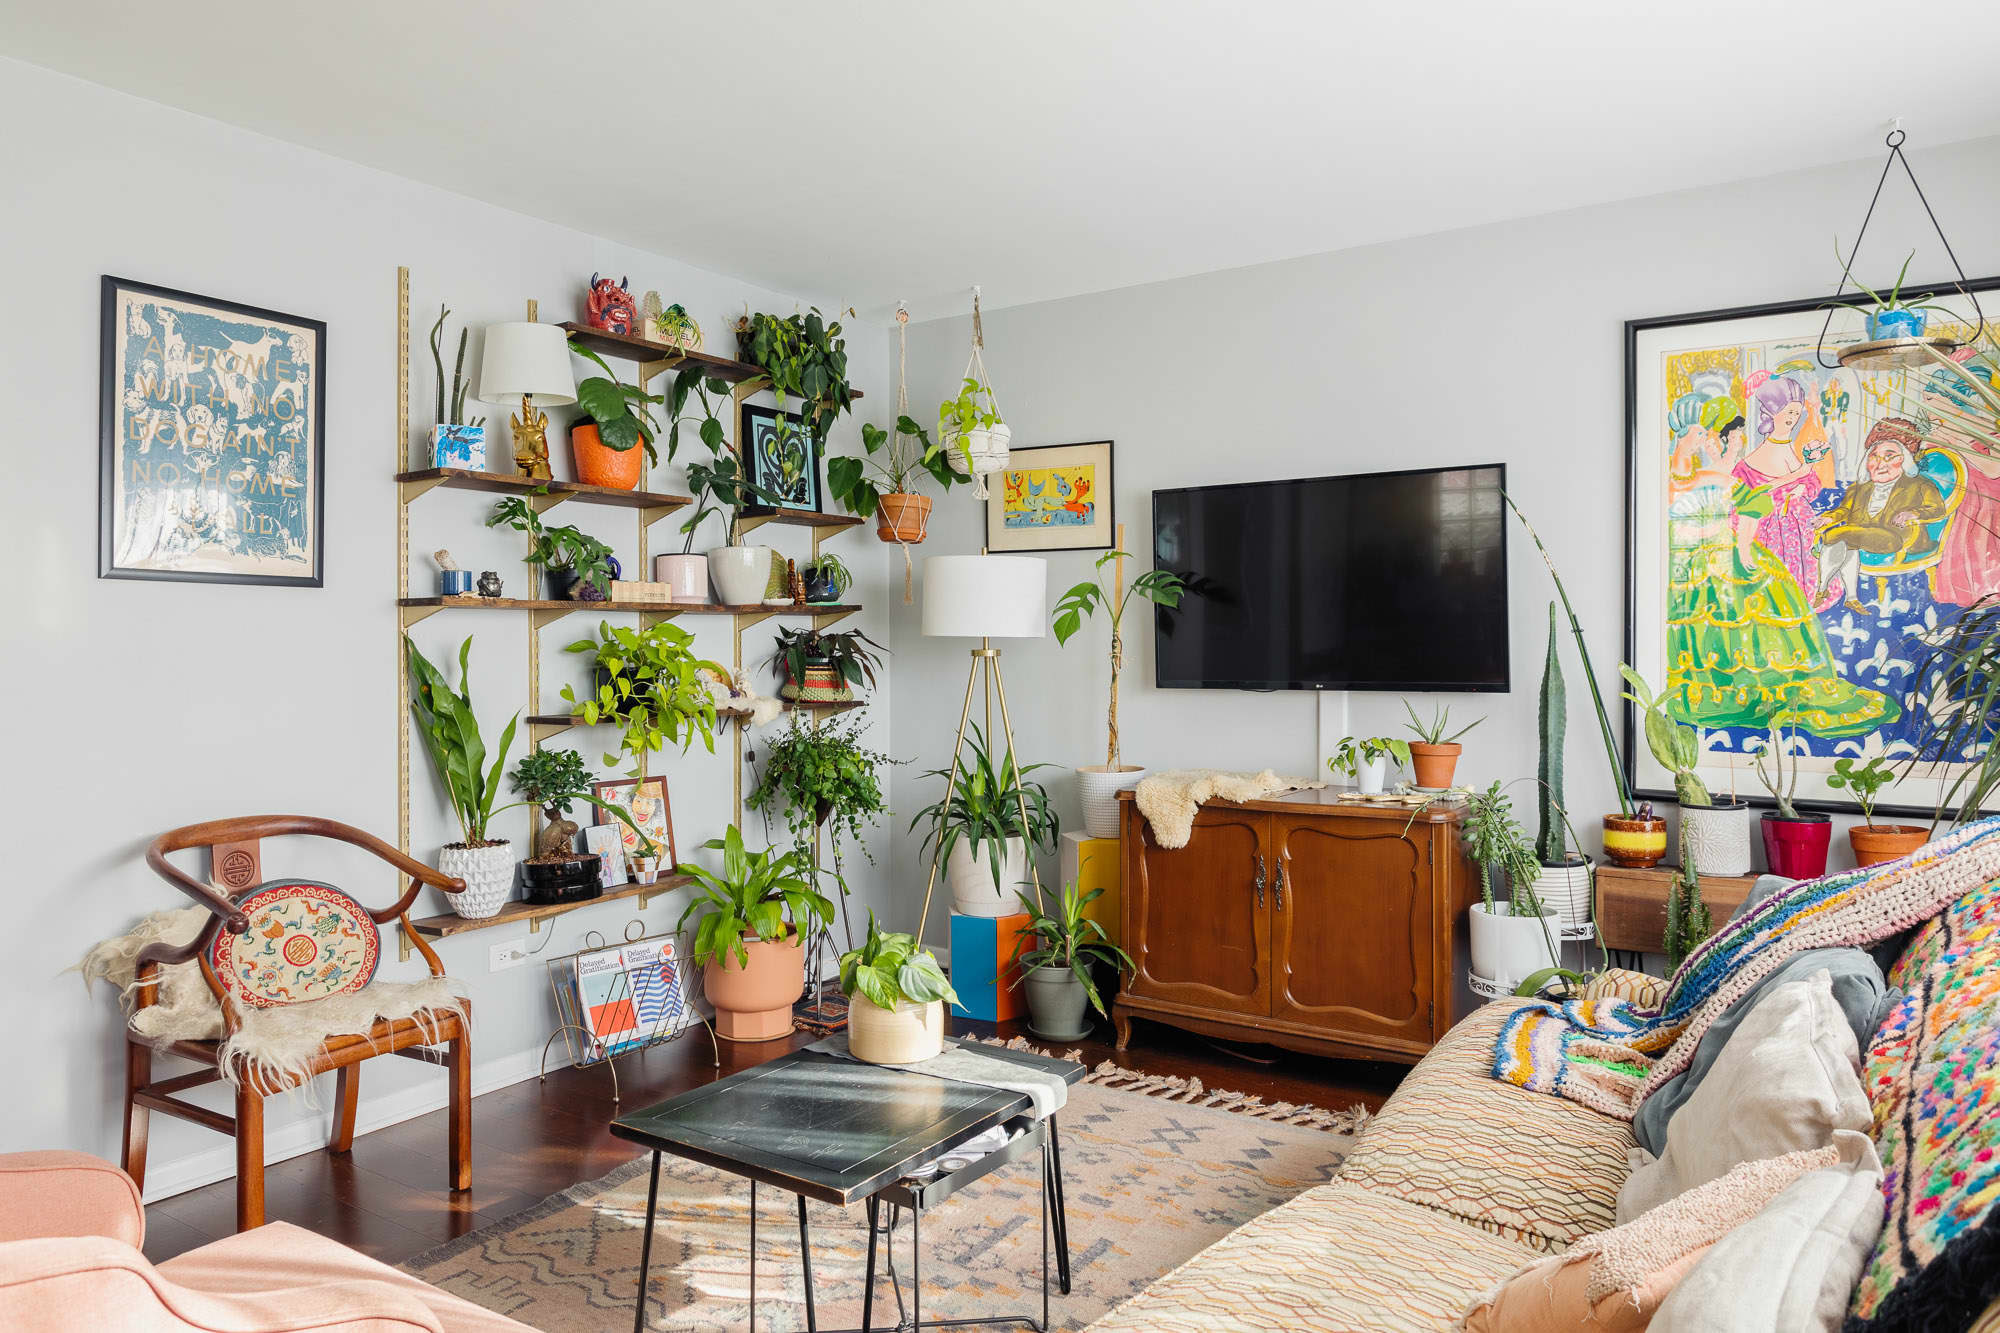 10 Genius Space-Saving Furniture Perfect For Small HDBs And Condos